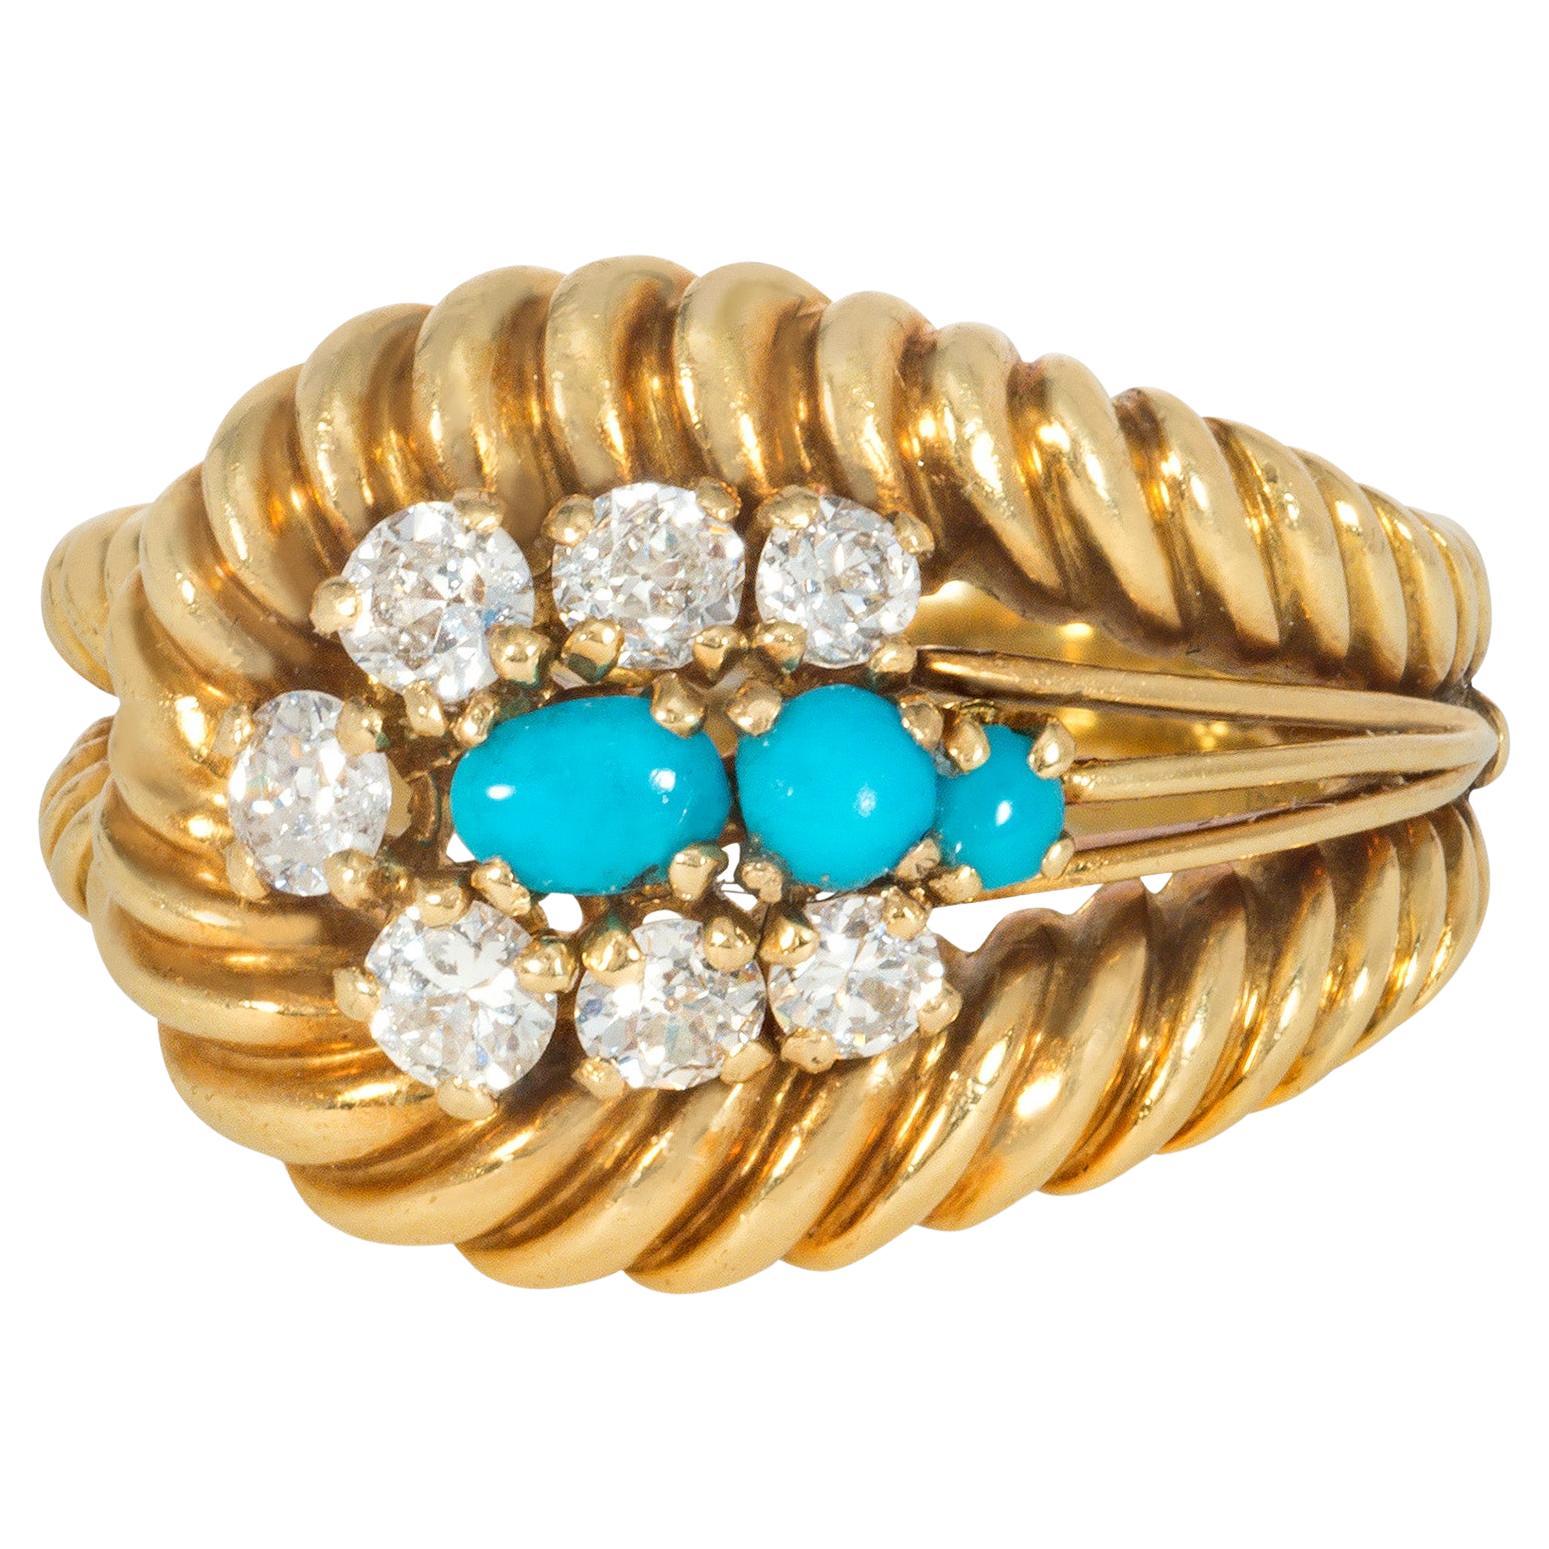 Cartier 1960s Gold, Turquoise, and Diamond Ring of Tapered and Reeded Design